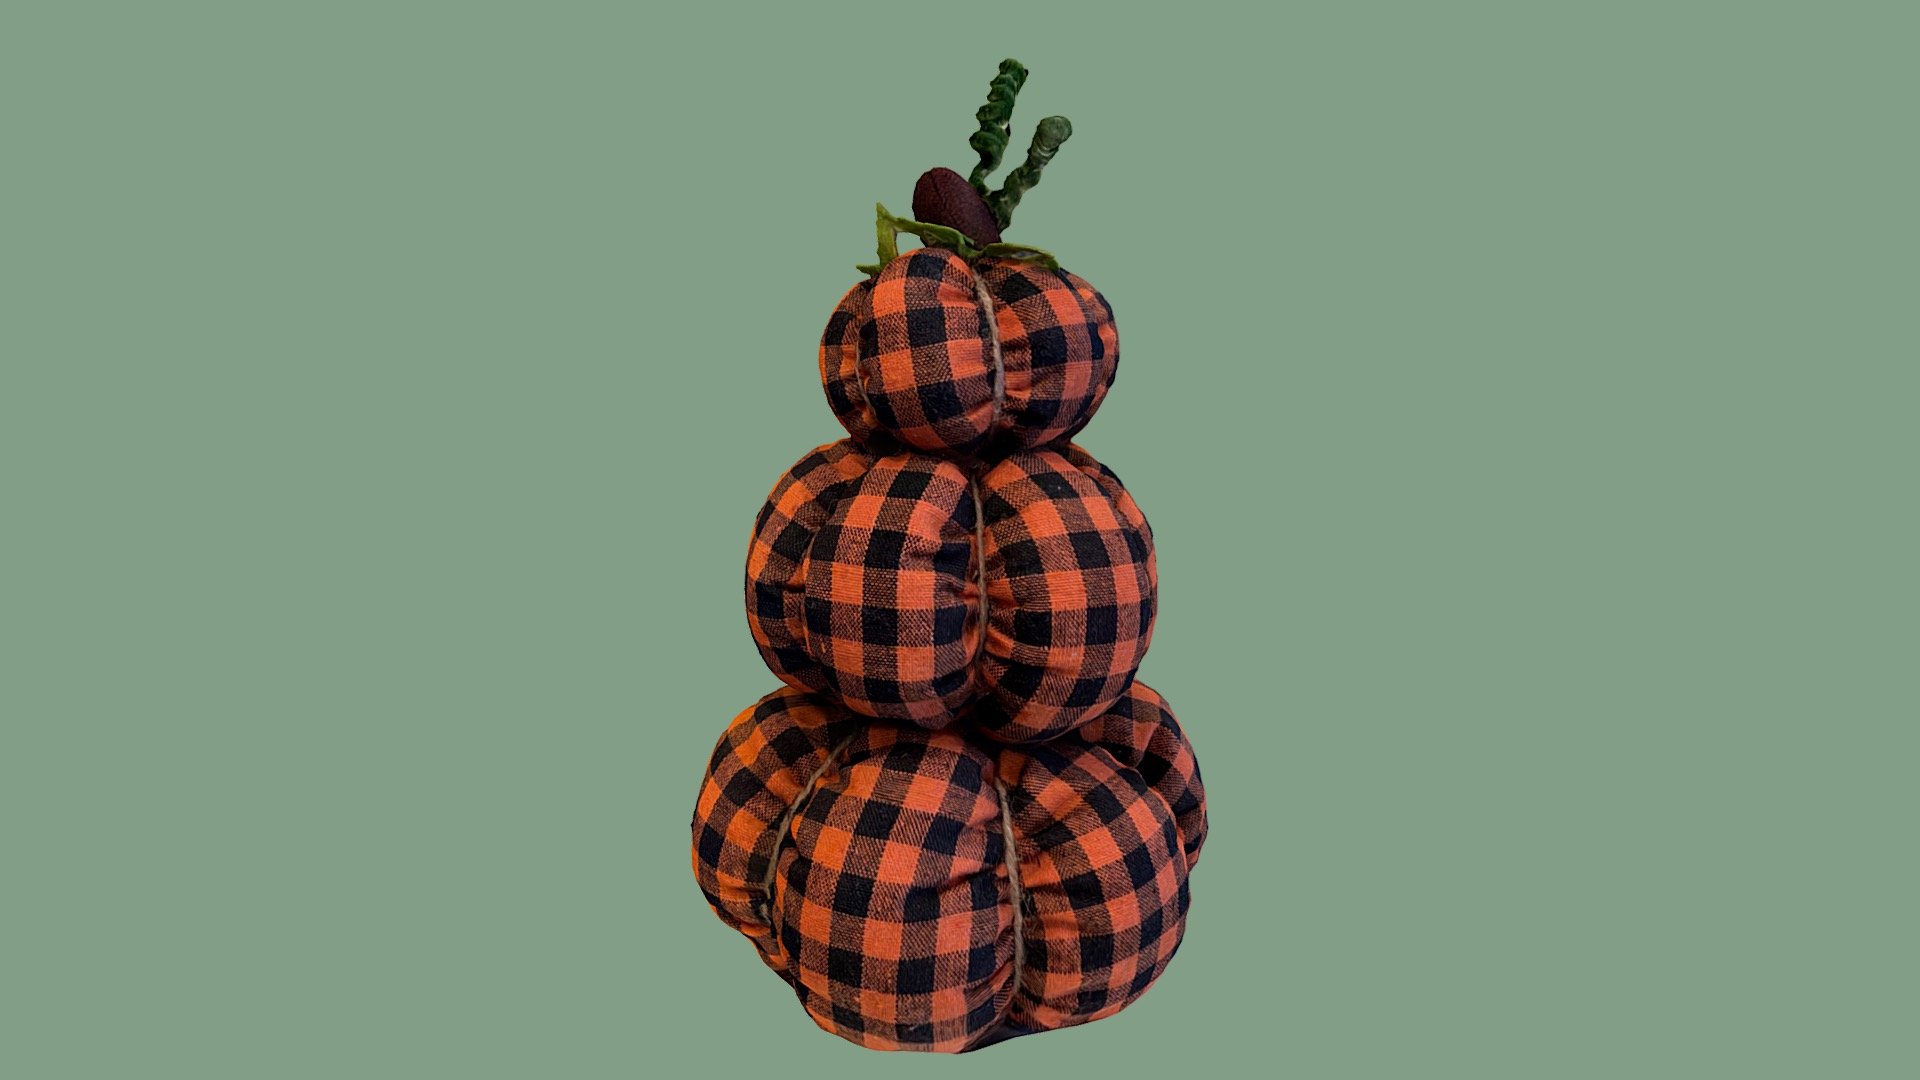 A stack of three pumpkin pillows made with flannel fabric 

Created with Polycam - Pumpkin Pillow - Buy Royalty Free 3D model by Studious Studios (@Studious) 3d model